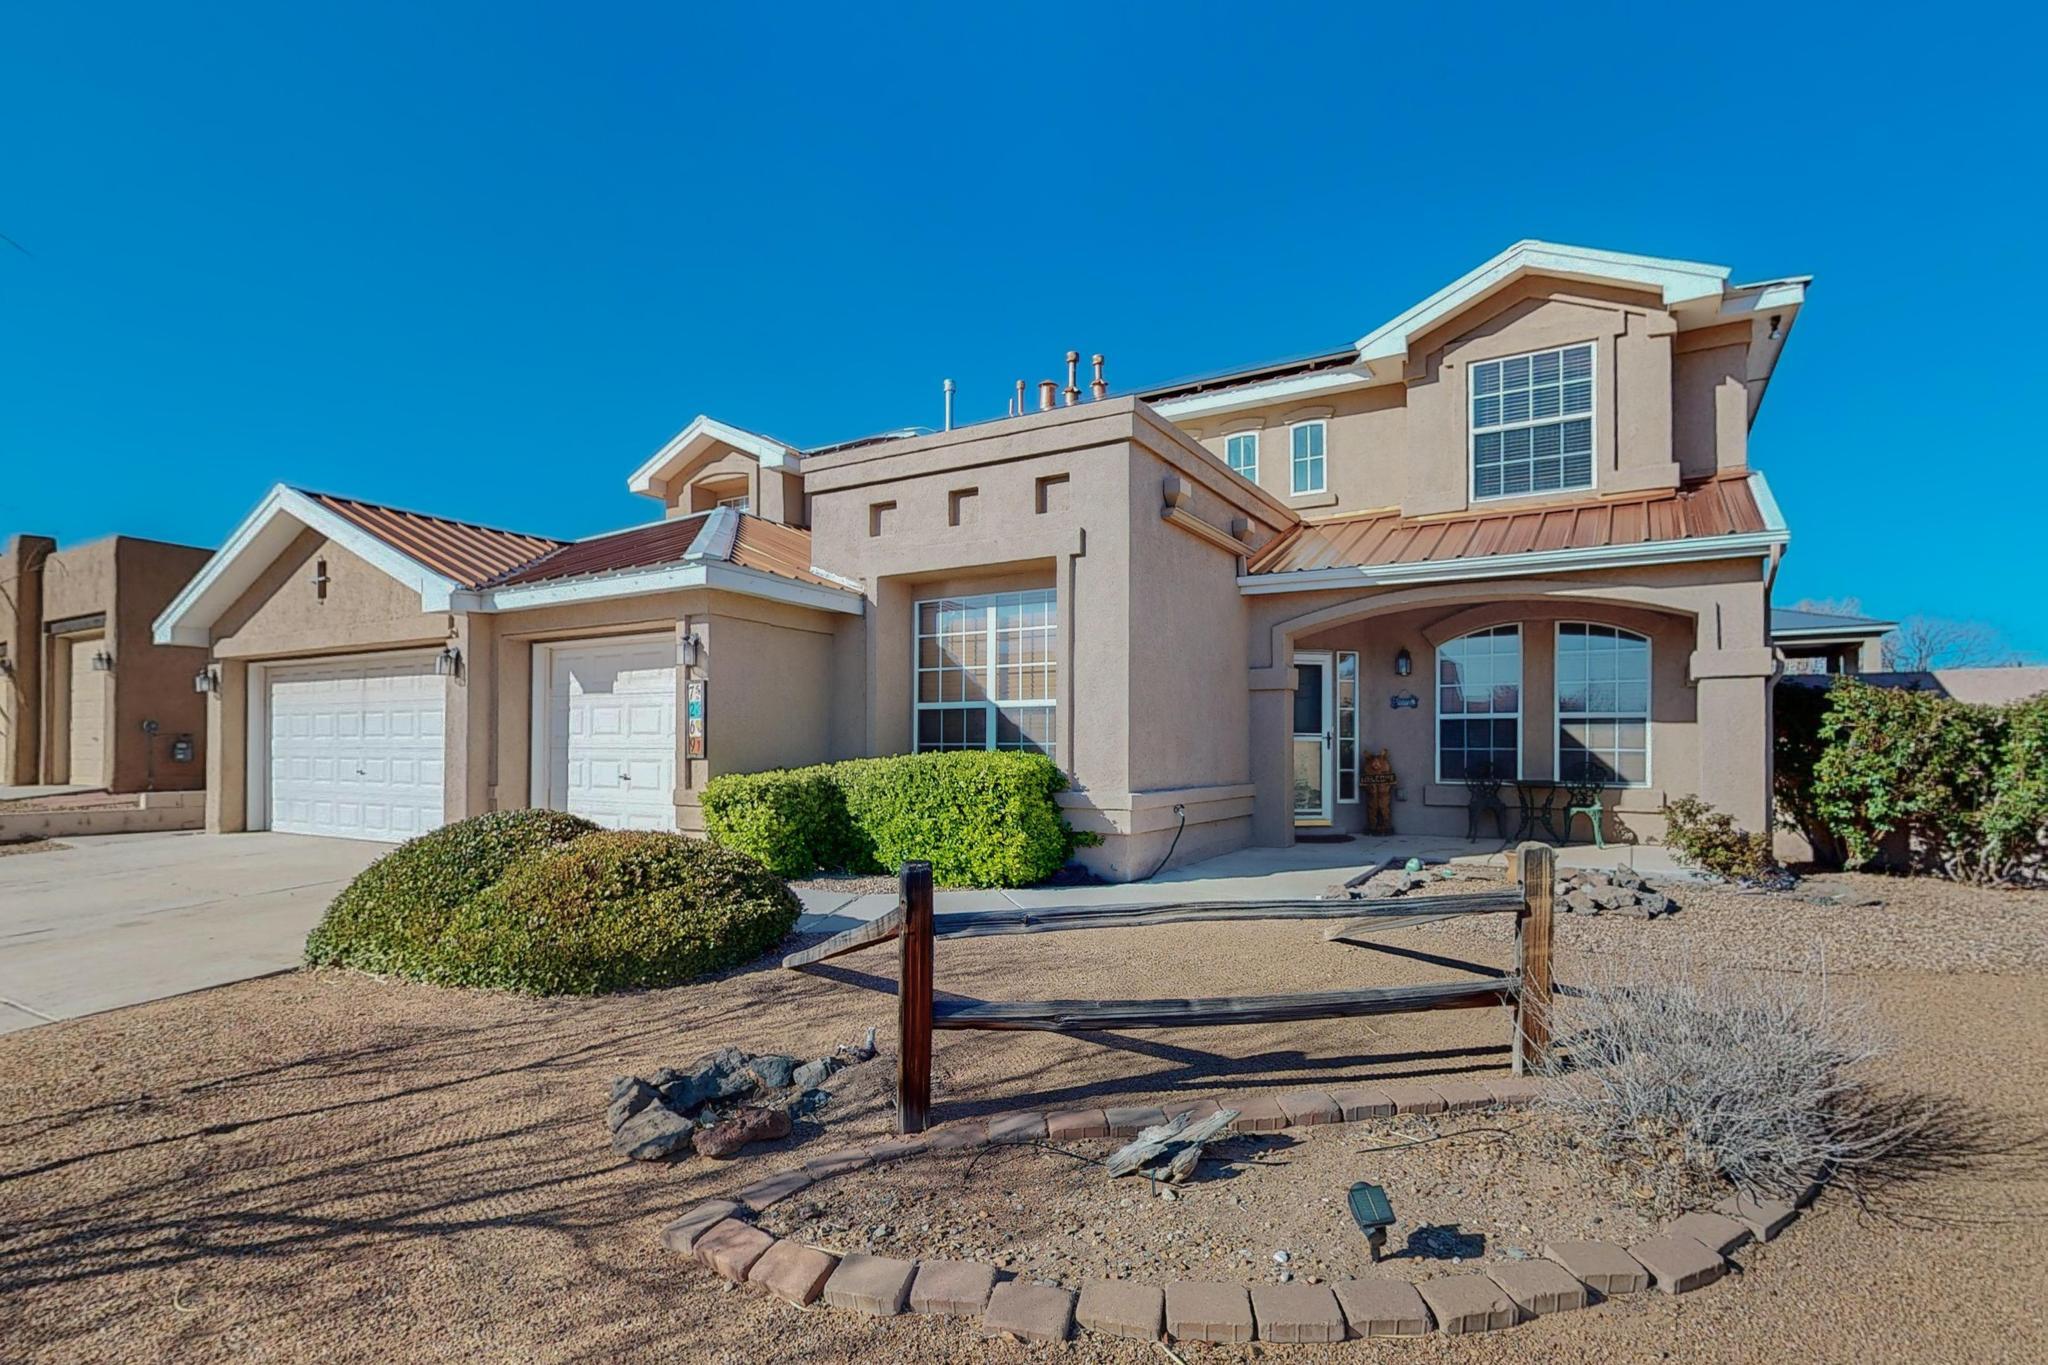 PREMIUM LOCATION! Stunning Rio Rancho home, perfectly situated on a large corner lot, offers unmatched convenience. Just 30 min from Santa Fe & 15 mins from Albuquerque, close to golf, casinos, dining, shopping, hospitals, I25 & more. With over 3000 sq ft, 4BR/3.5BA, 3-car garage, plus a versatile loft w closet, it's ideal for large family living. Upgrades incl. custom paint, copper color metal roof, $45k seller-owned solar system, water softener w/ R/O system. Fully landscaped front/backyards boast outdoor seating/grilling & raised planter beds. Main floor incl. primary BR with ensuite, 2 walk-in closets, laundry w/sink, office, dining, breakfast nook, built-in desk. Upstairs: jack-and-jill BR's, cozy bench seat BR, huge loft. The perfect blend of luxury and functionality. Move in ready!